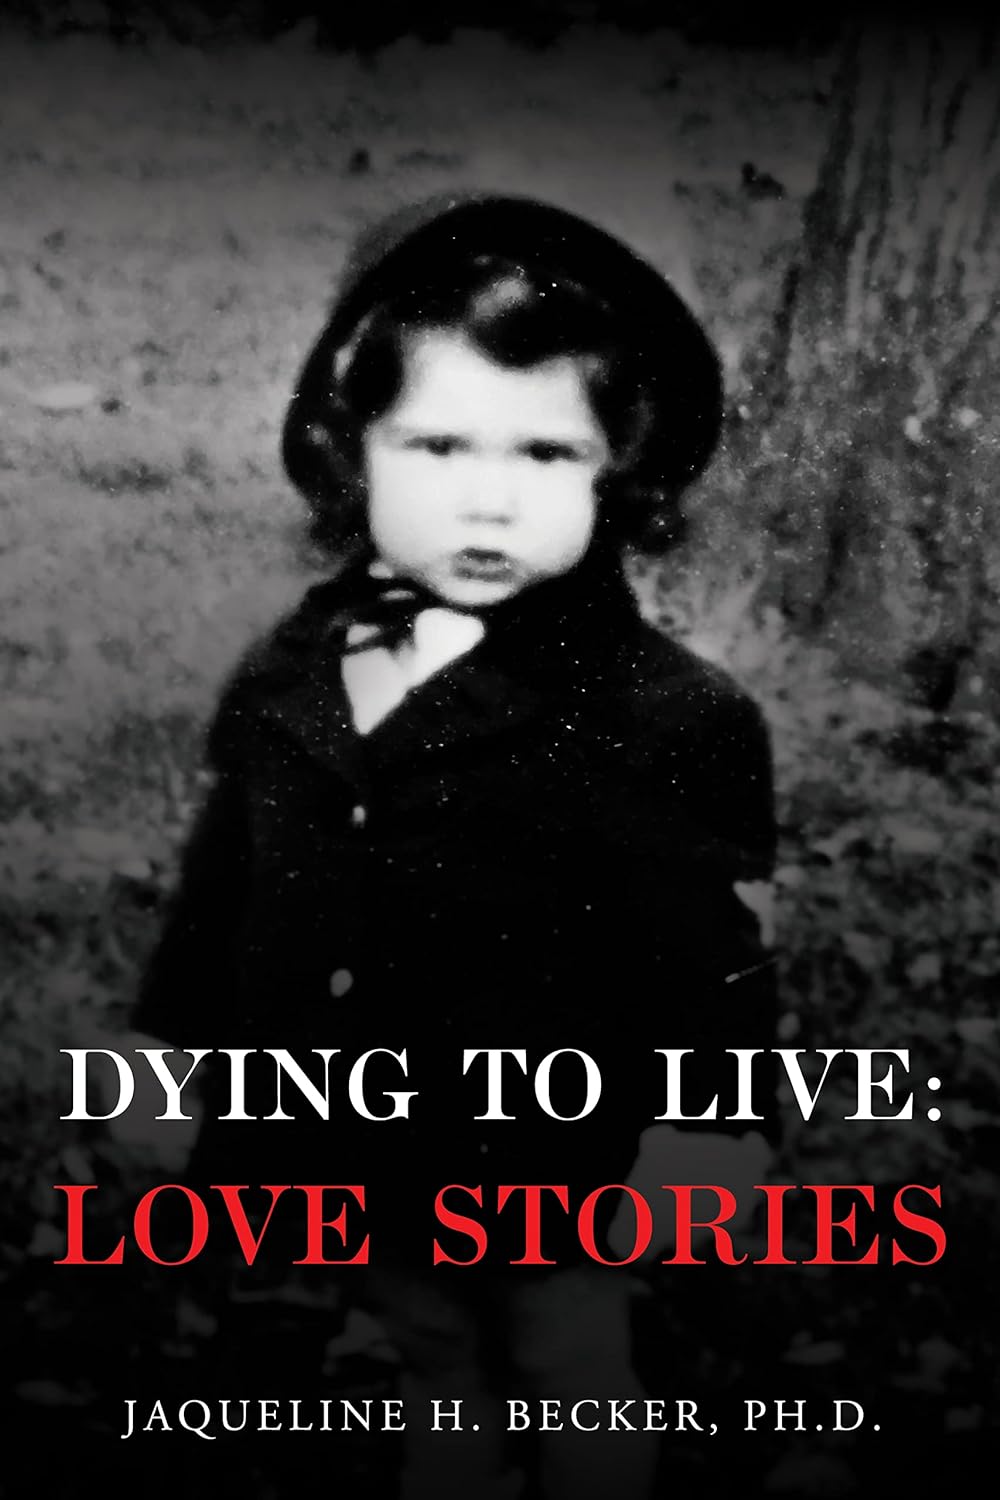 Dying to Live: Love Stories by Jaqueline H. Becker PhD